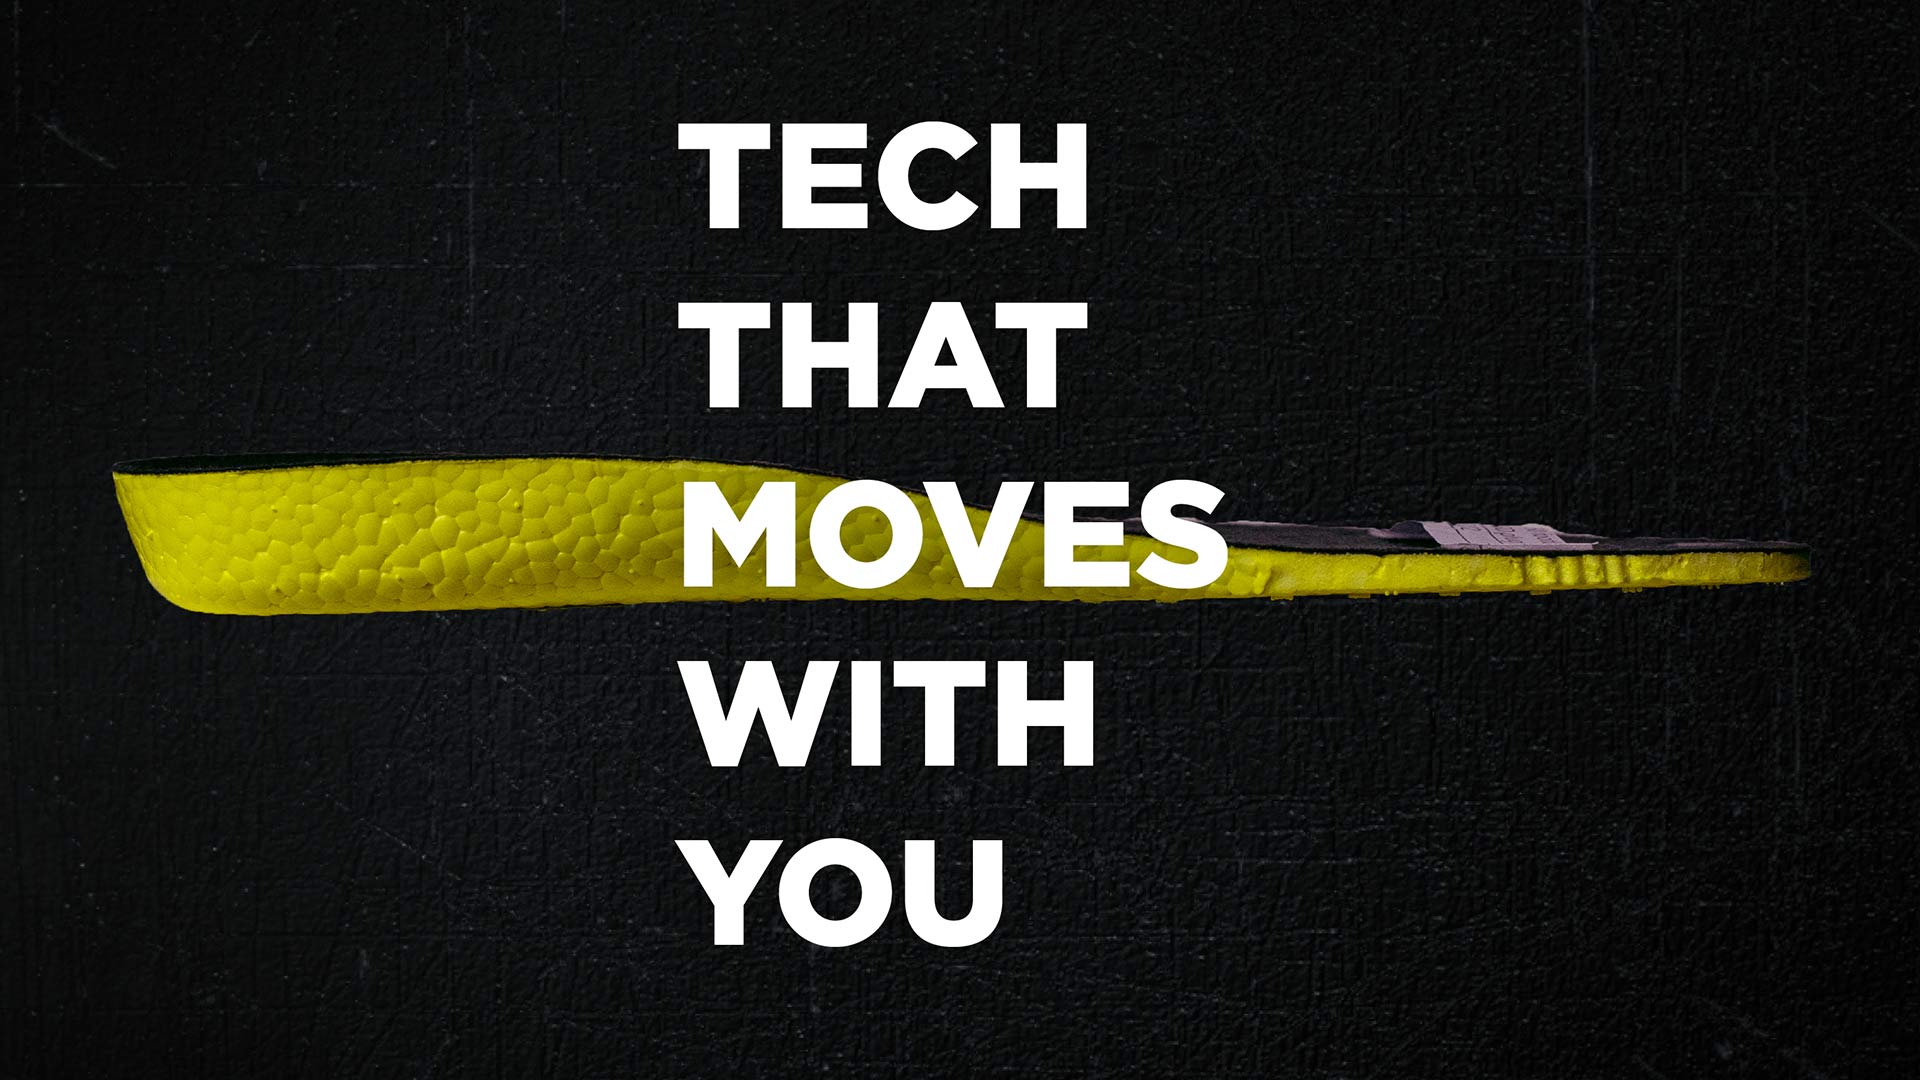 Preview from tech demo: Tech that moves with you